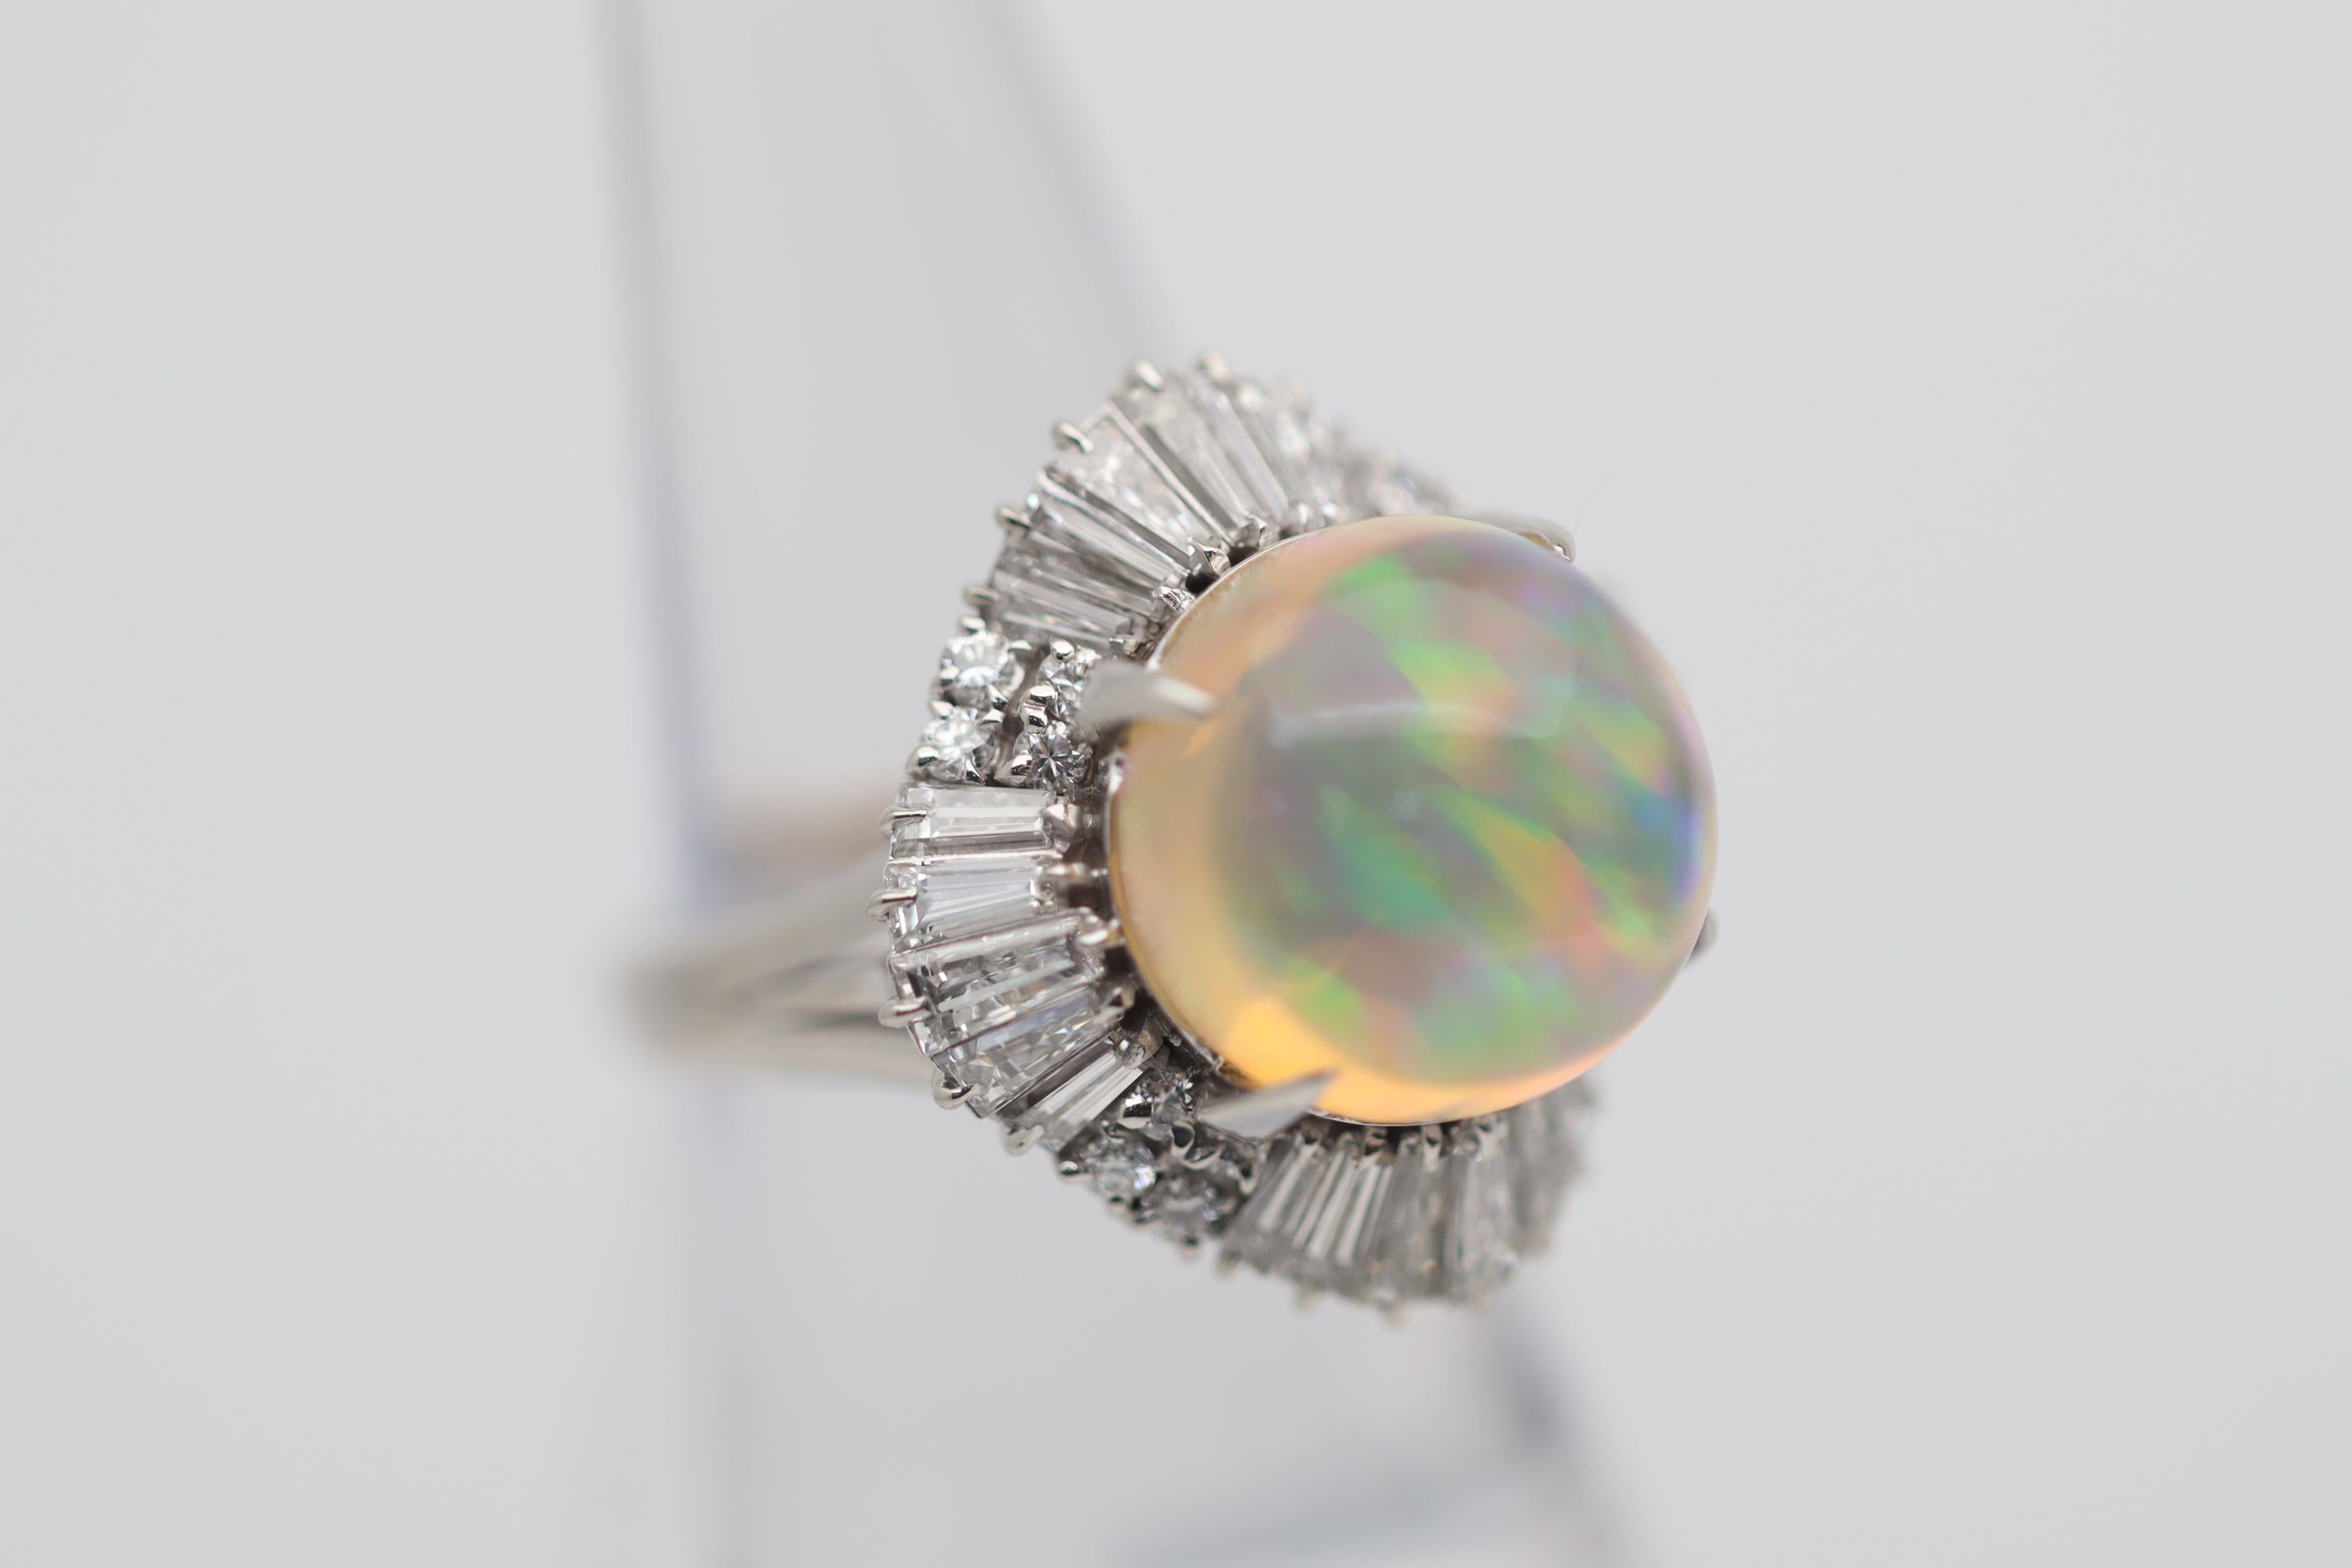 Cabochon 8.59 Carat “Disco Ball” Fire Opal Diamond Platinum Cocktail Ring For Sale